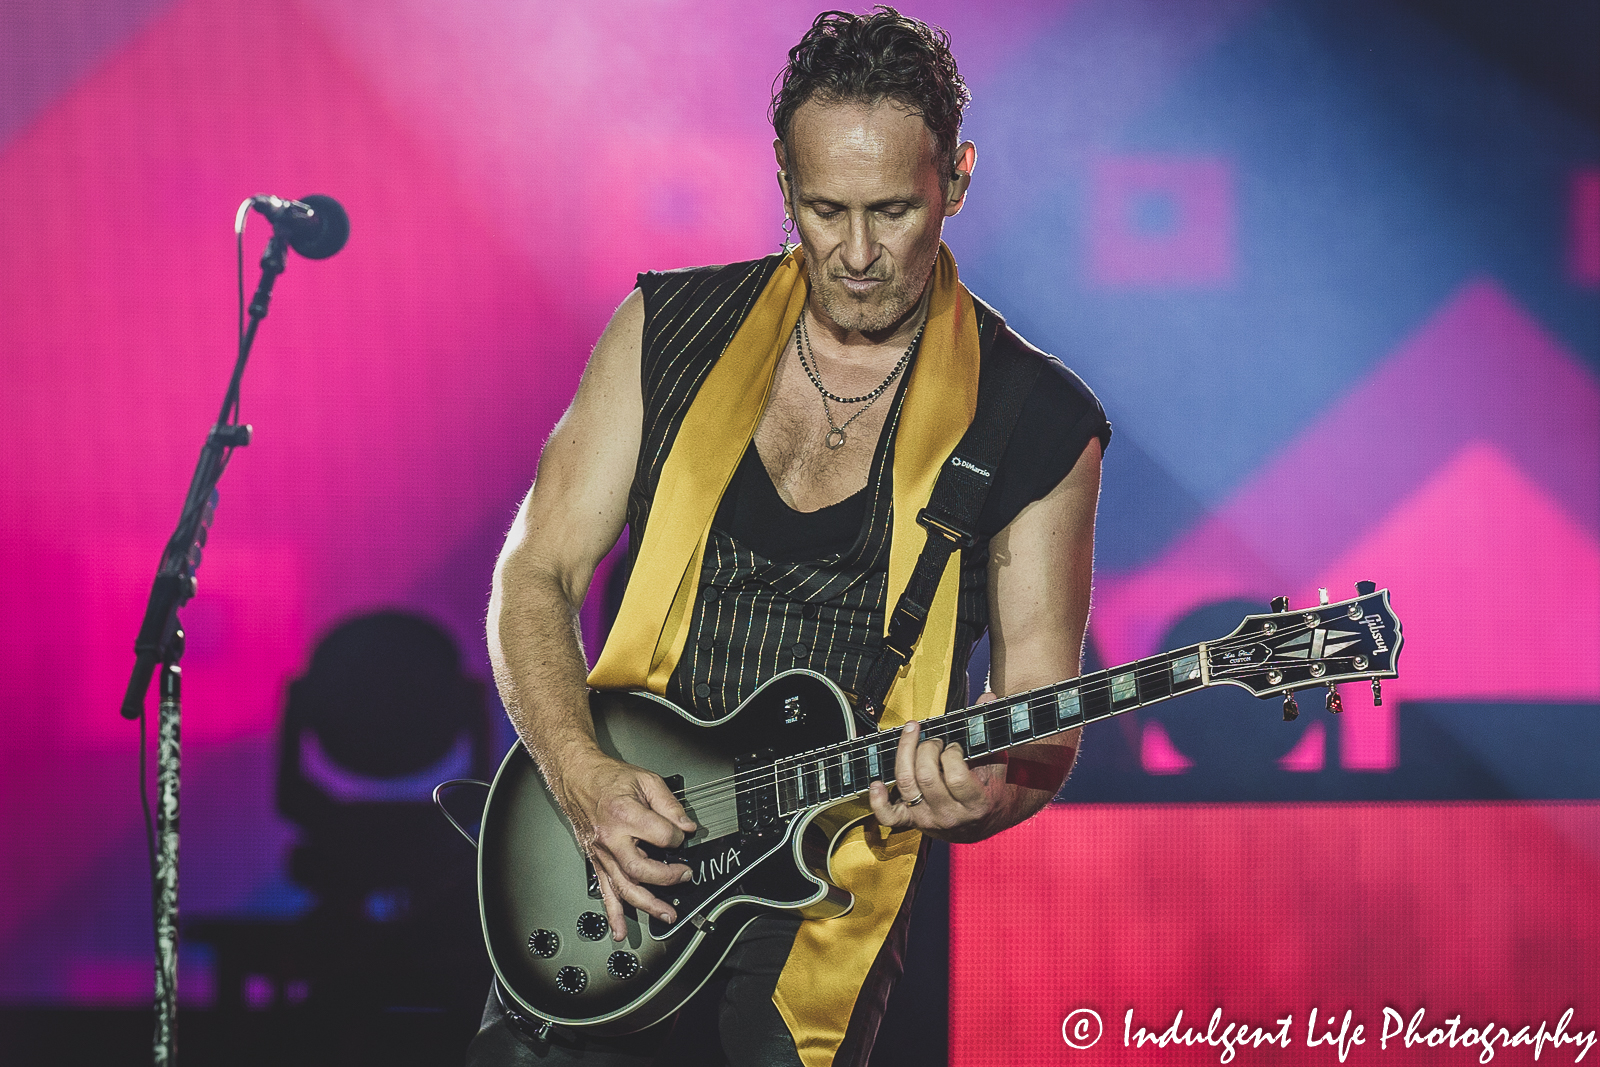 Guitarist Vivian Campbell of Def Leppard performing live during the band's stadium tour concert at Kauffman Stadium in Kansas City, MO on July 19, 2022.